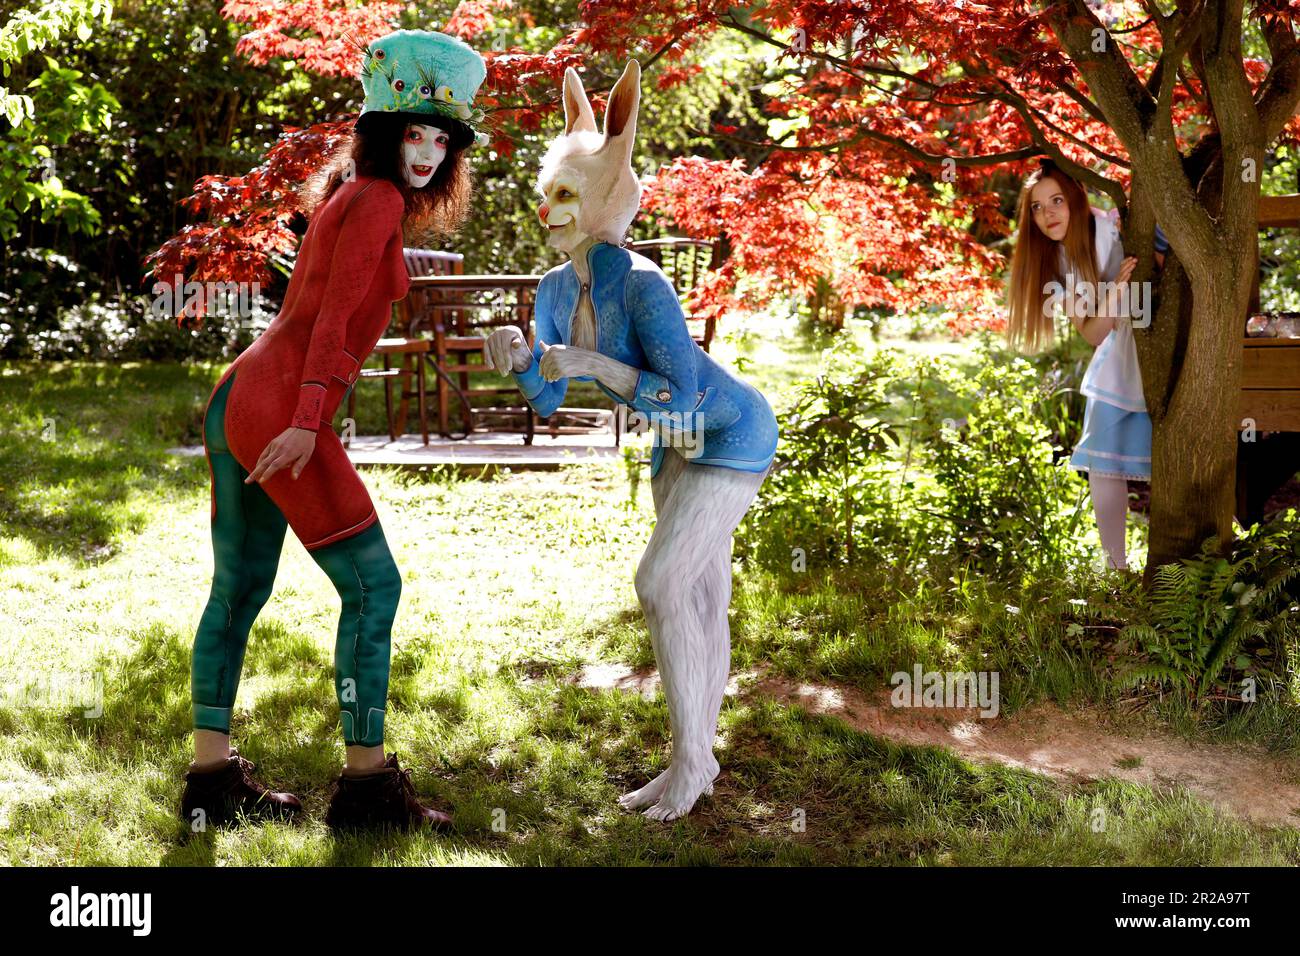 GEEK ART - Bodypainting and Transformaking: Alice in Wonderland photoshooting with Melina as Alice, Julia as the Mad Hatter and Janina as the White Rabbit in the Czarnecki Garden. Hamelin on May 18, 202 - A project by photographer Tschiponnique Skupin and bodypainter Enrico Lein Stock Photo